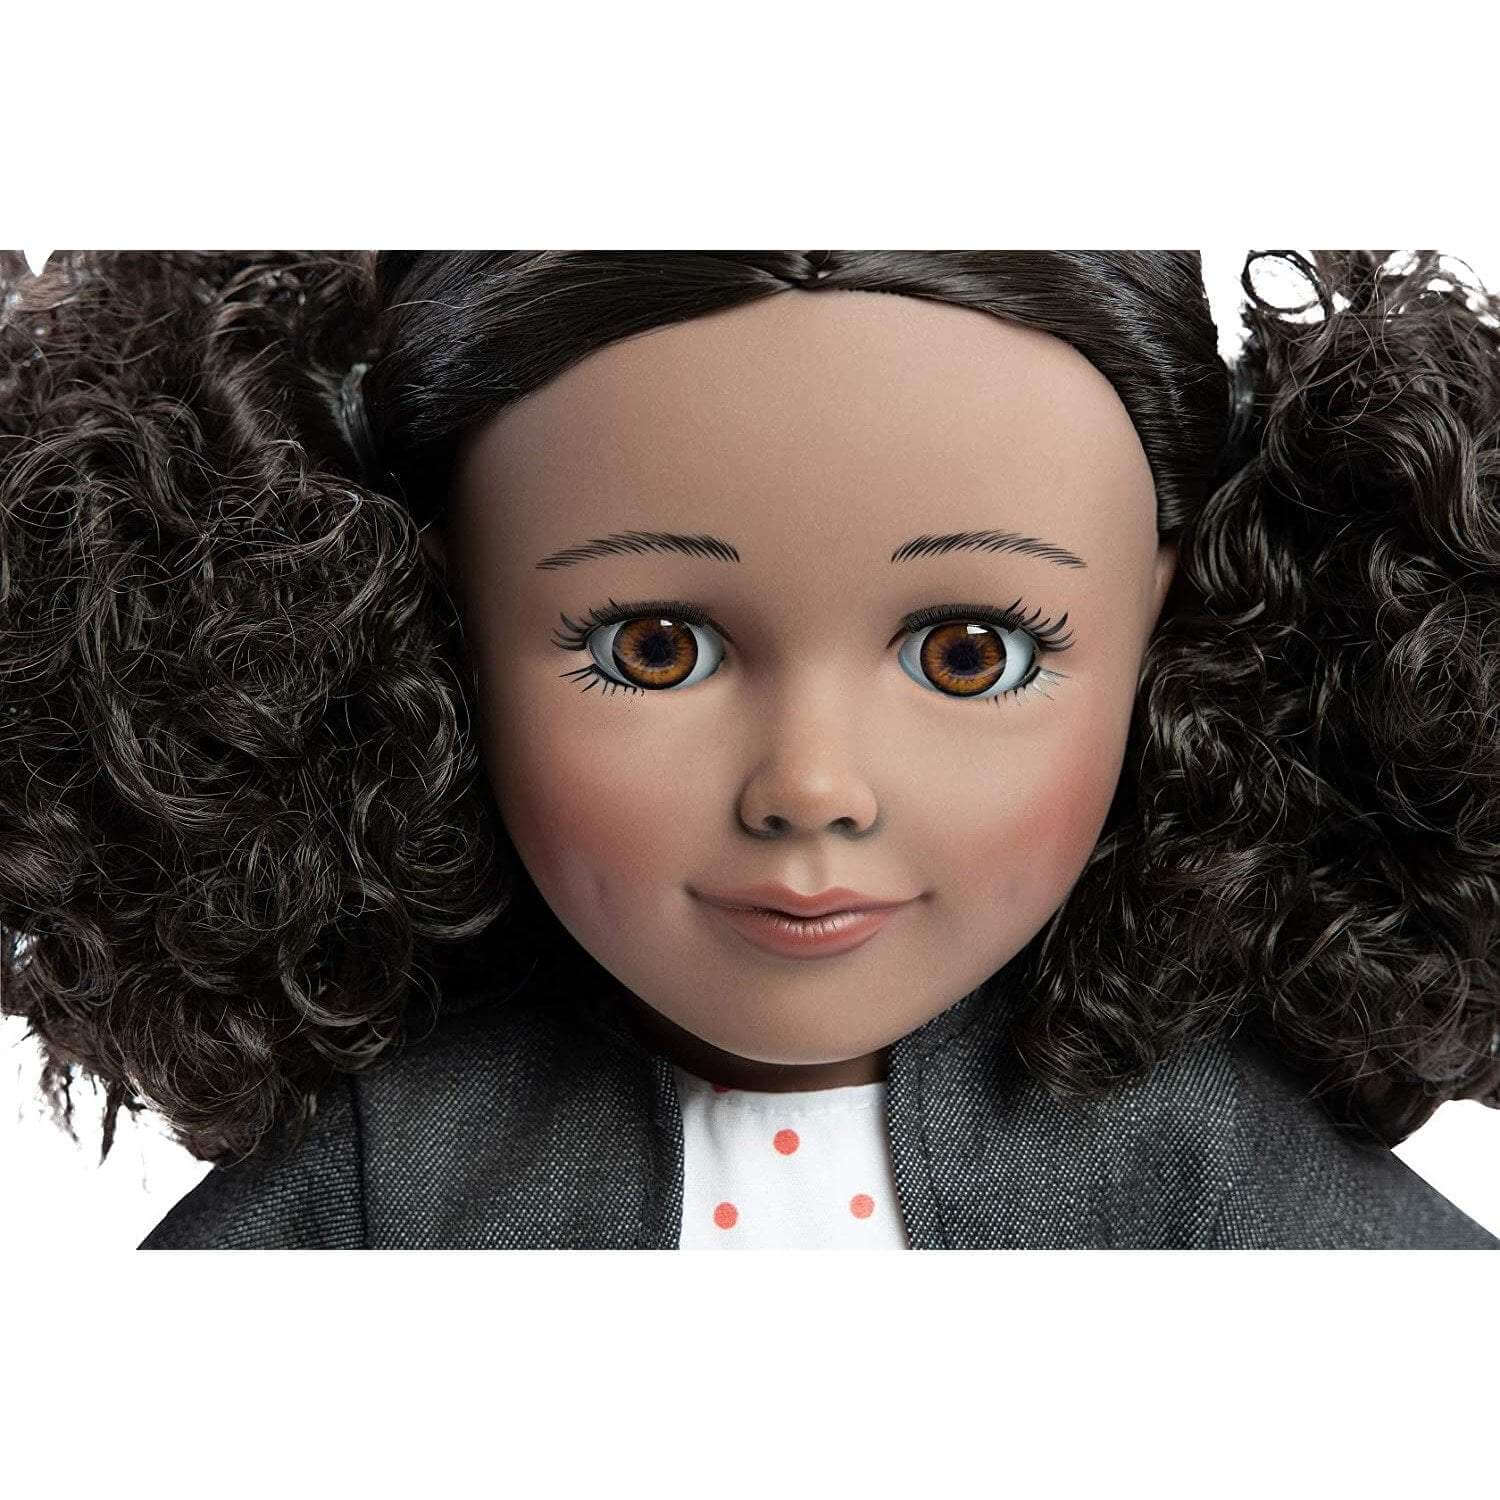 Kaylie - Brown Skinned Natural Haired 18in Doll with Carrying Case, Doll Outfit, and Pajamas